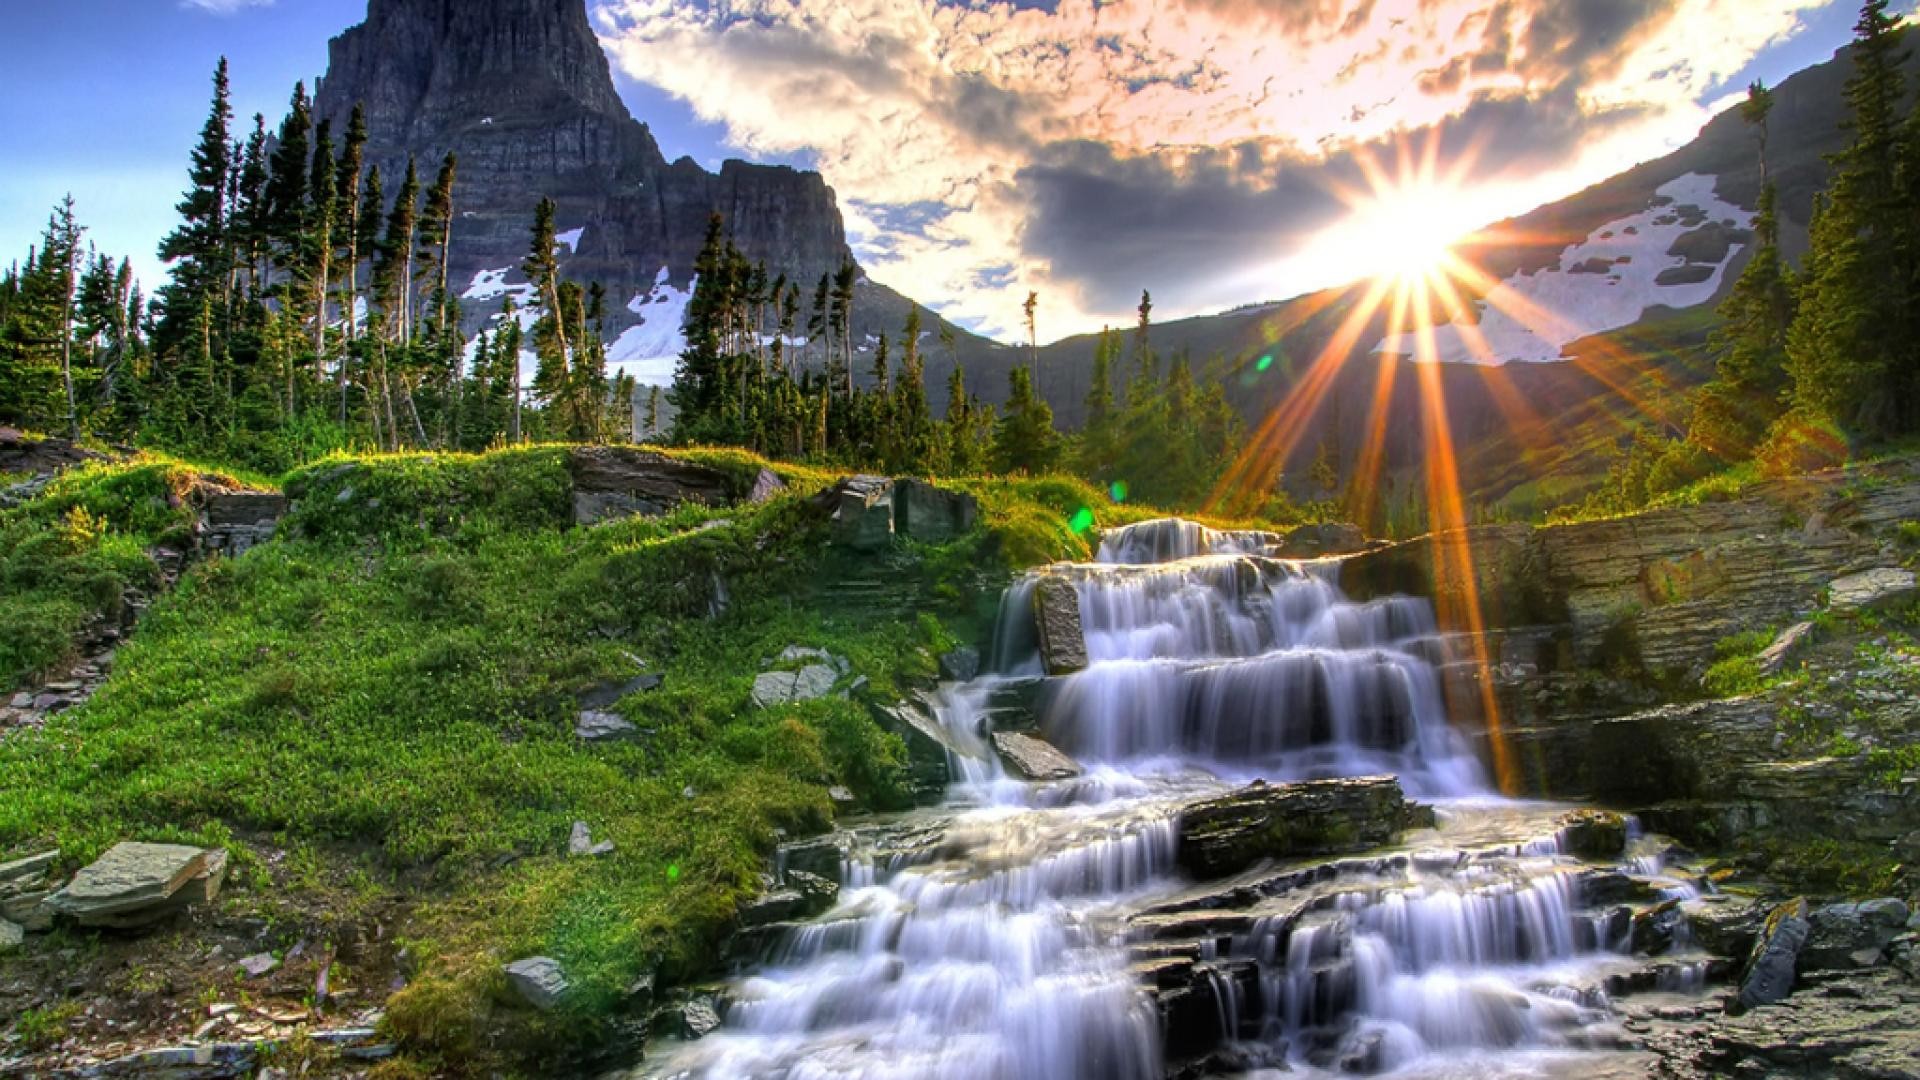 Wallpapers Collection Â«Waterfall WallpapersÂ» | HD Wallpapers | Pinterest |  Waterfall wallpaper, Hd wallpaper and Wallpaper